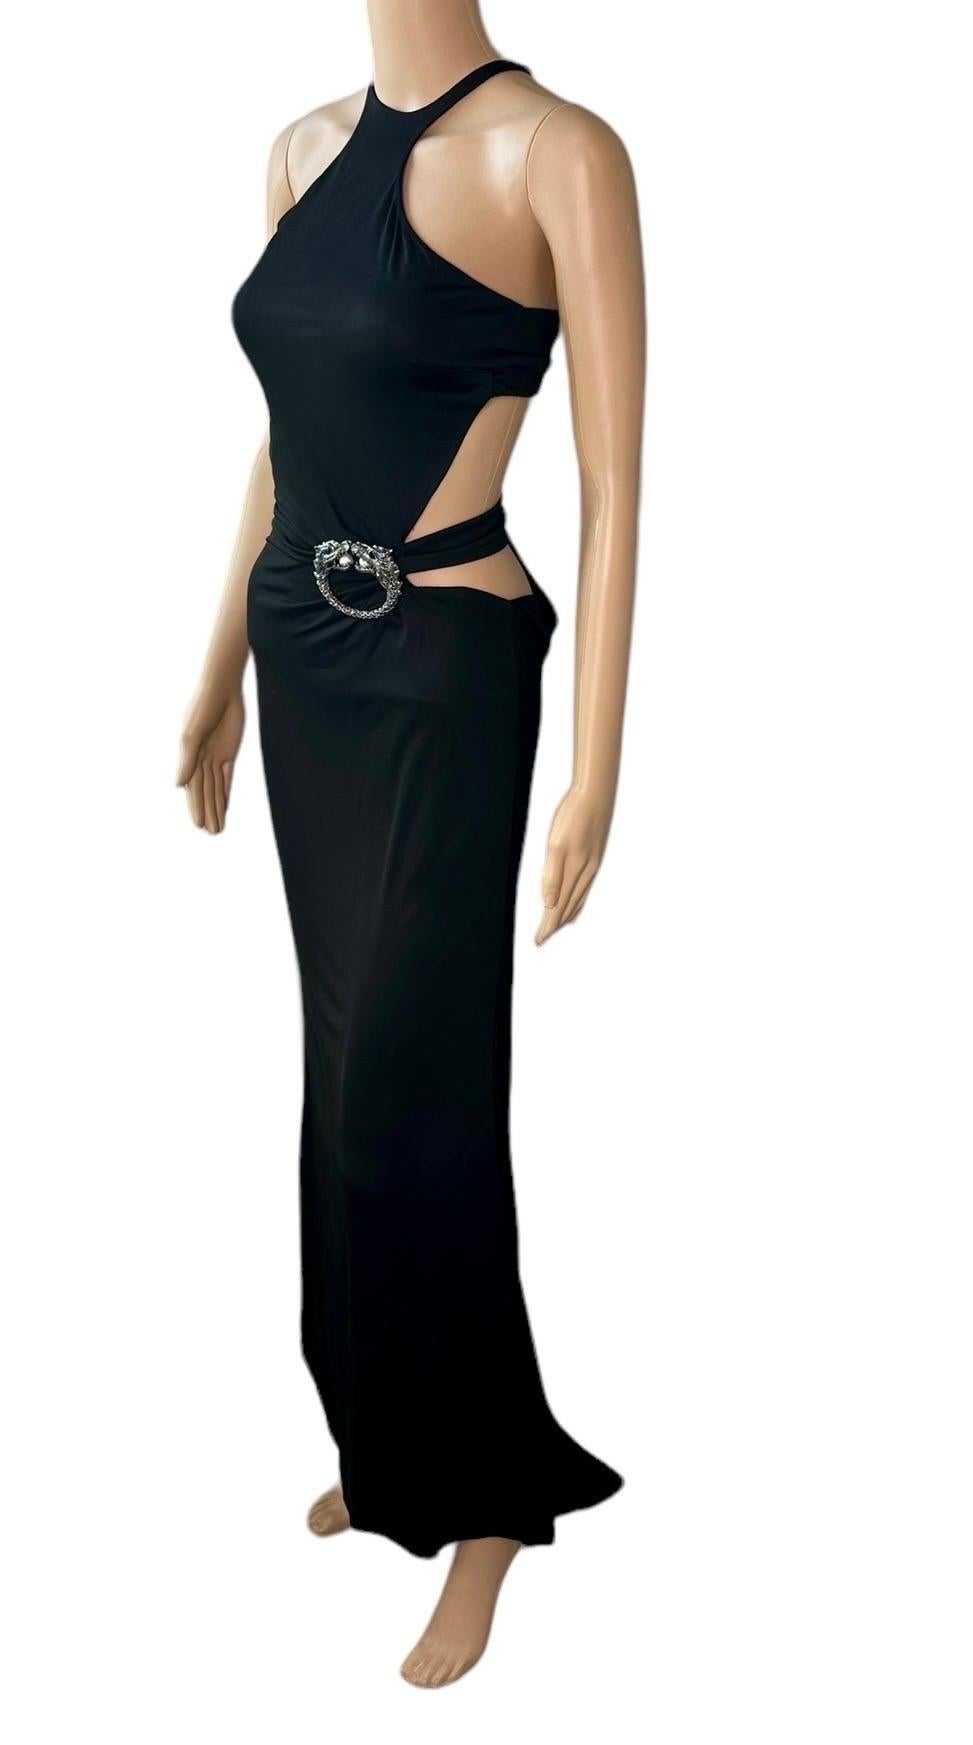 Tom Ford for Gucci F/W 2004 Embellished Plunging Cutout Black Evening Dress Gown For Sale 7